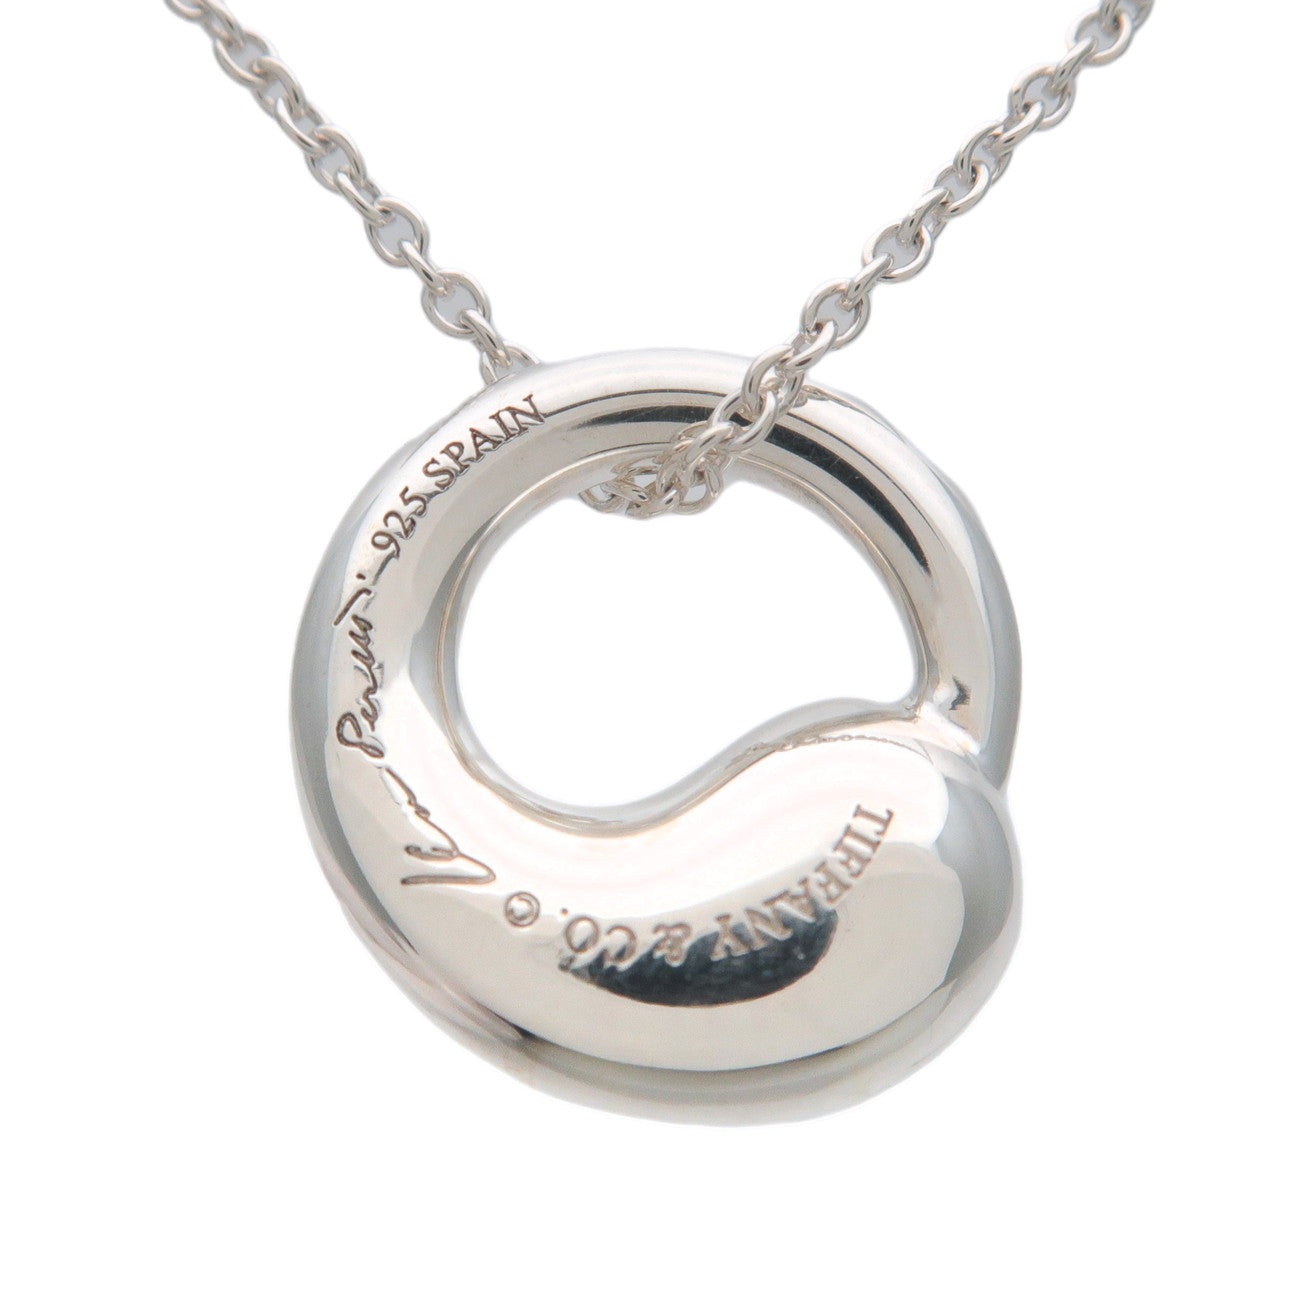 Tiffany&Co. Eternal Circle Necklace SV925 Silver